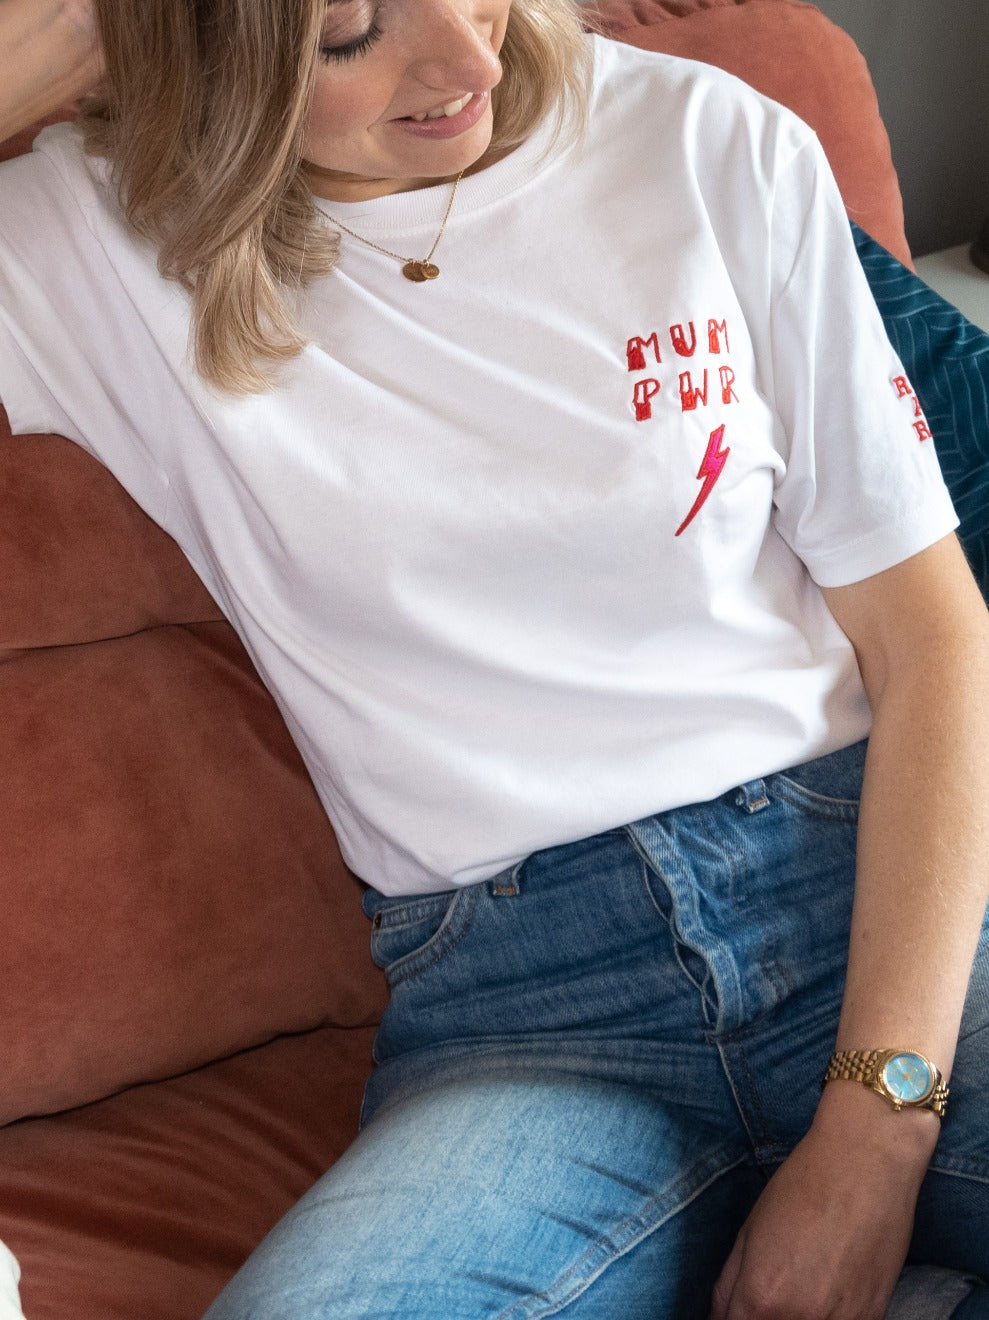 Embroidered Mum Pwr T shirt